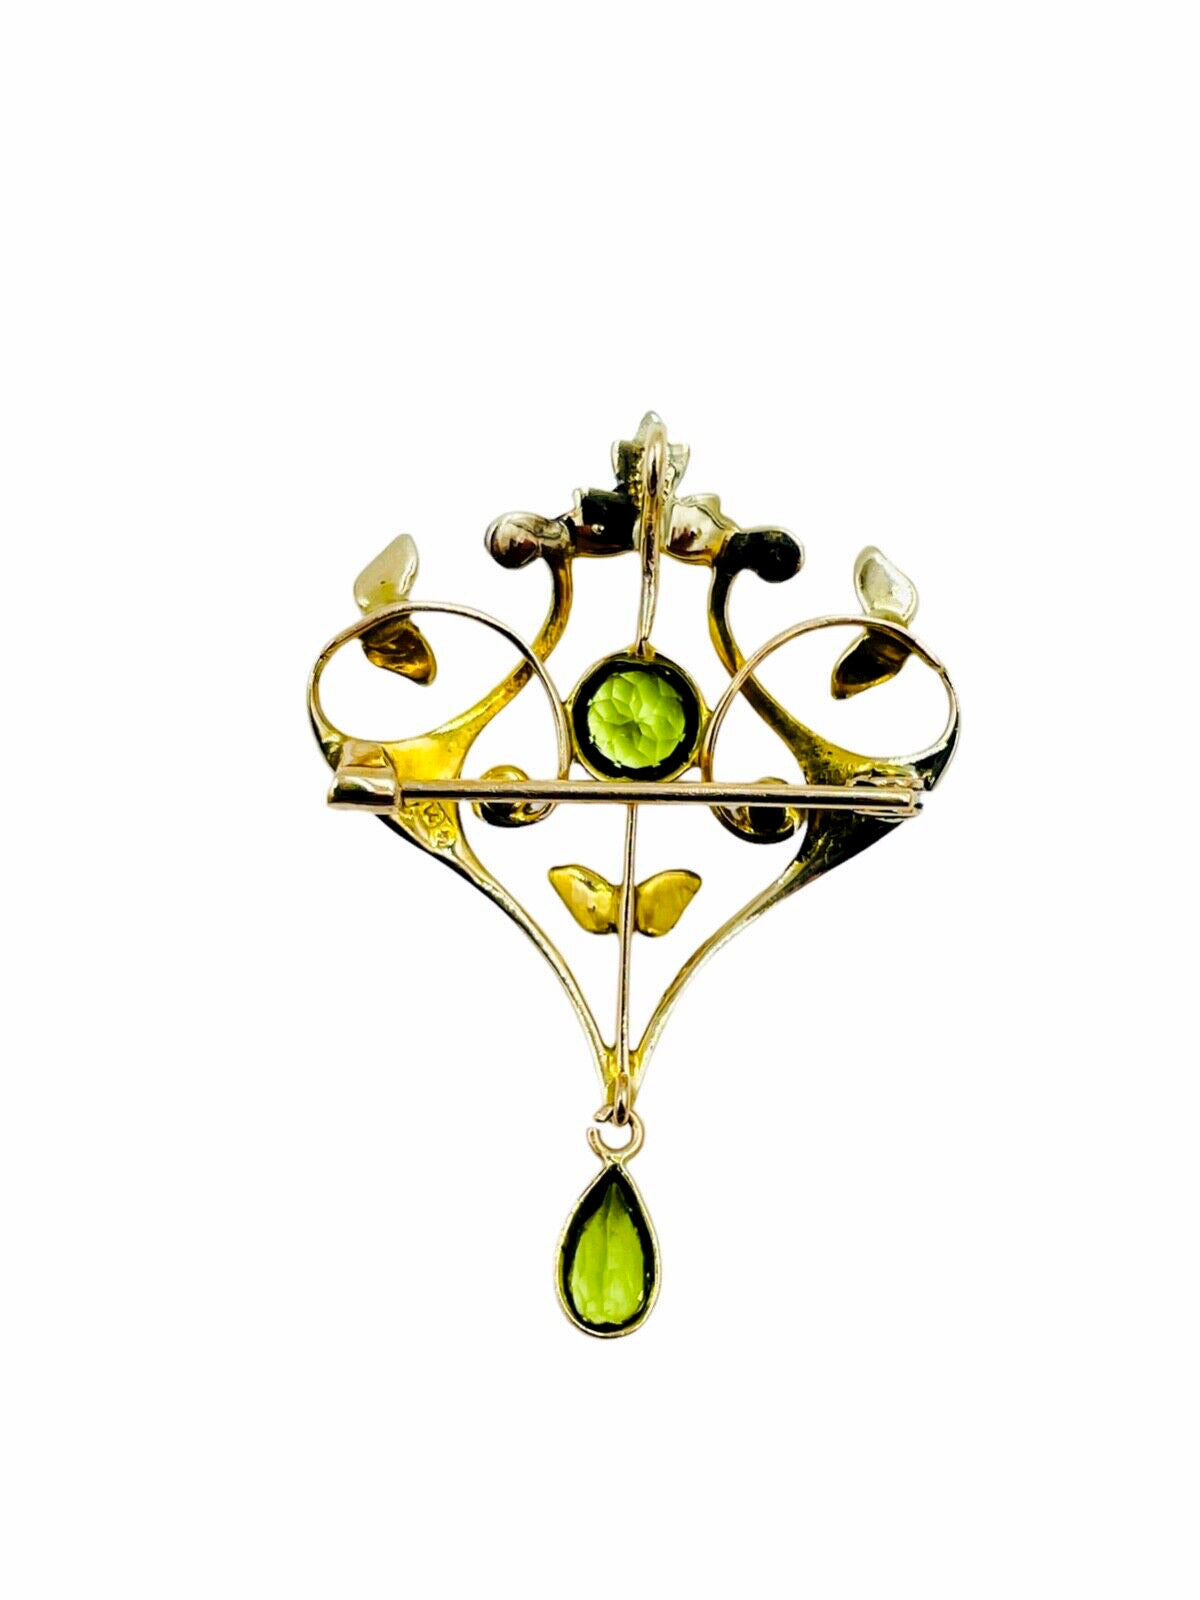 Antique Brooch Pin Pearls and Peridot 9ct Art Nouveau 9k